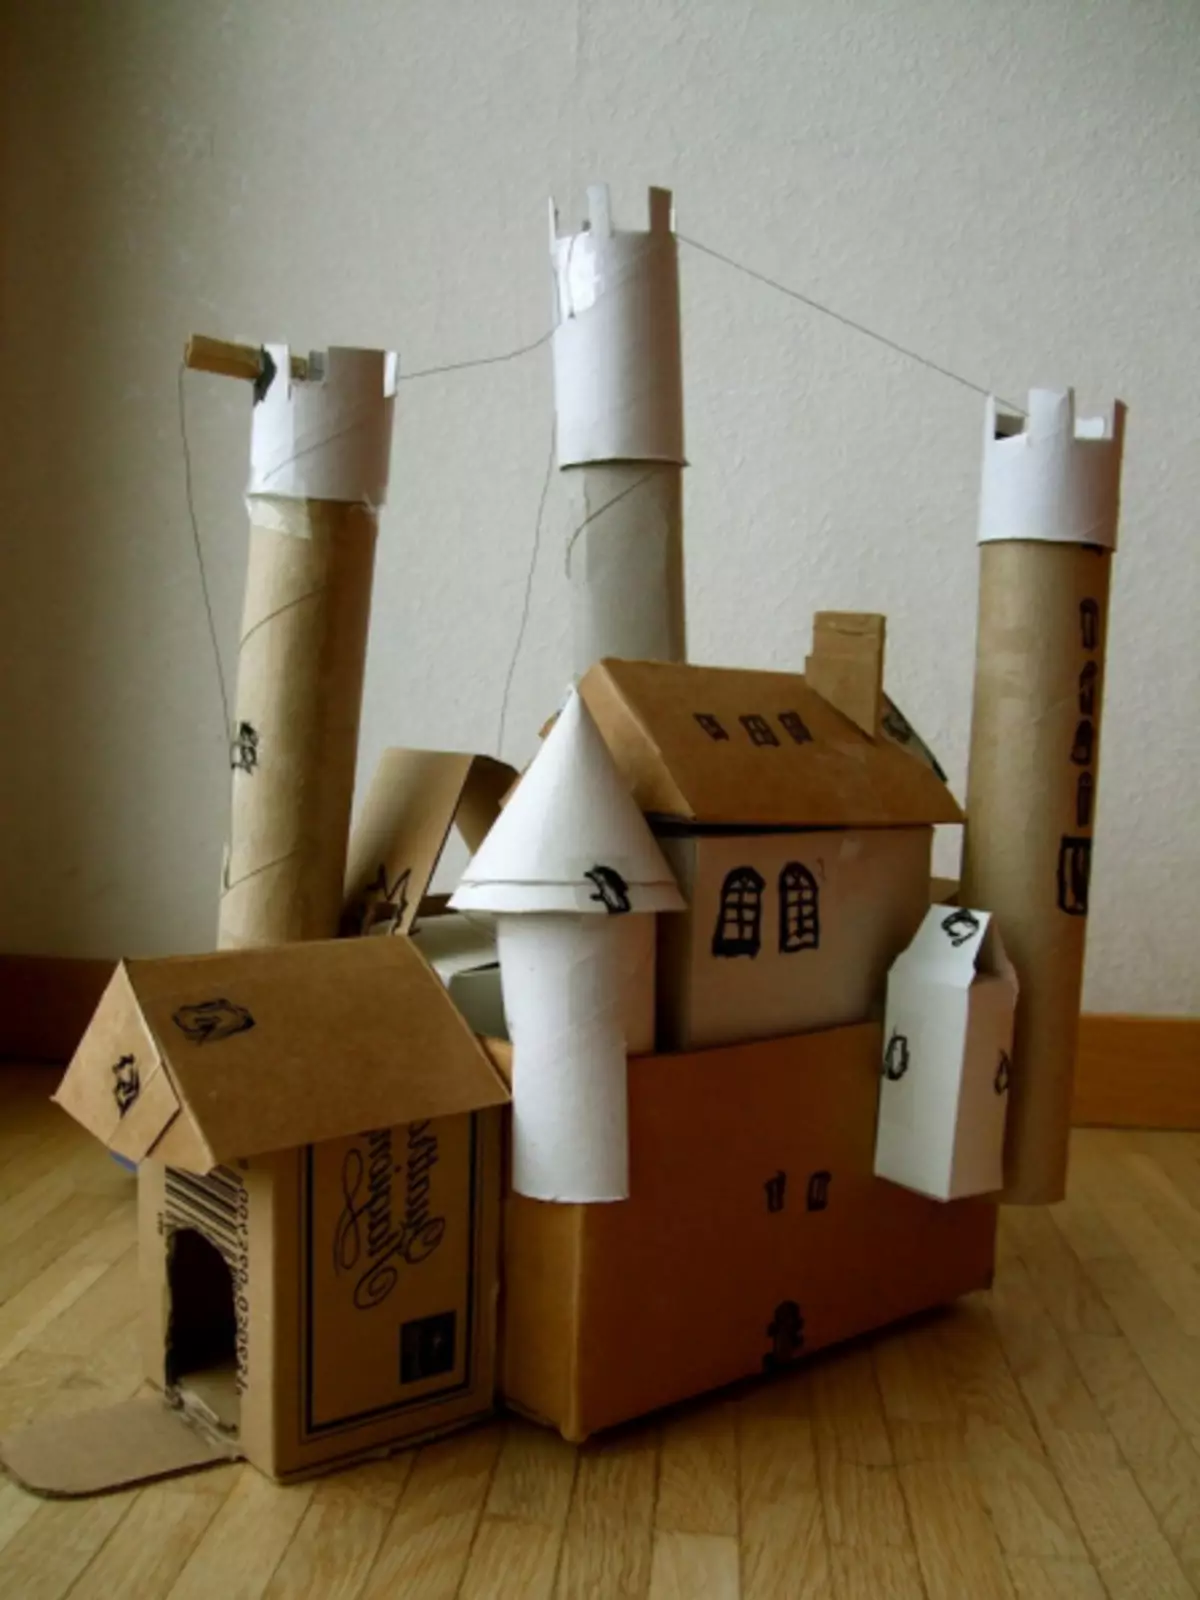 Cardboard boxes: Toys for children and ideas for home (39 photos)